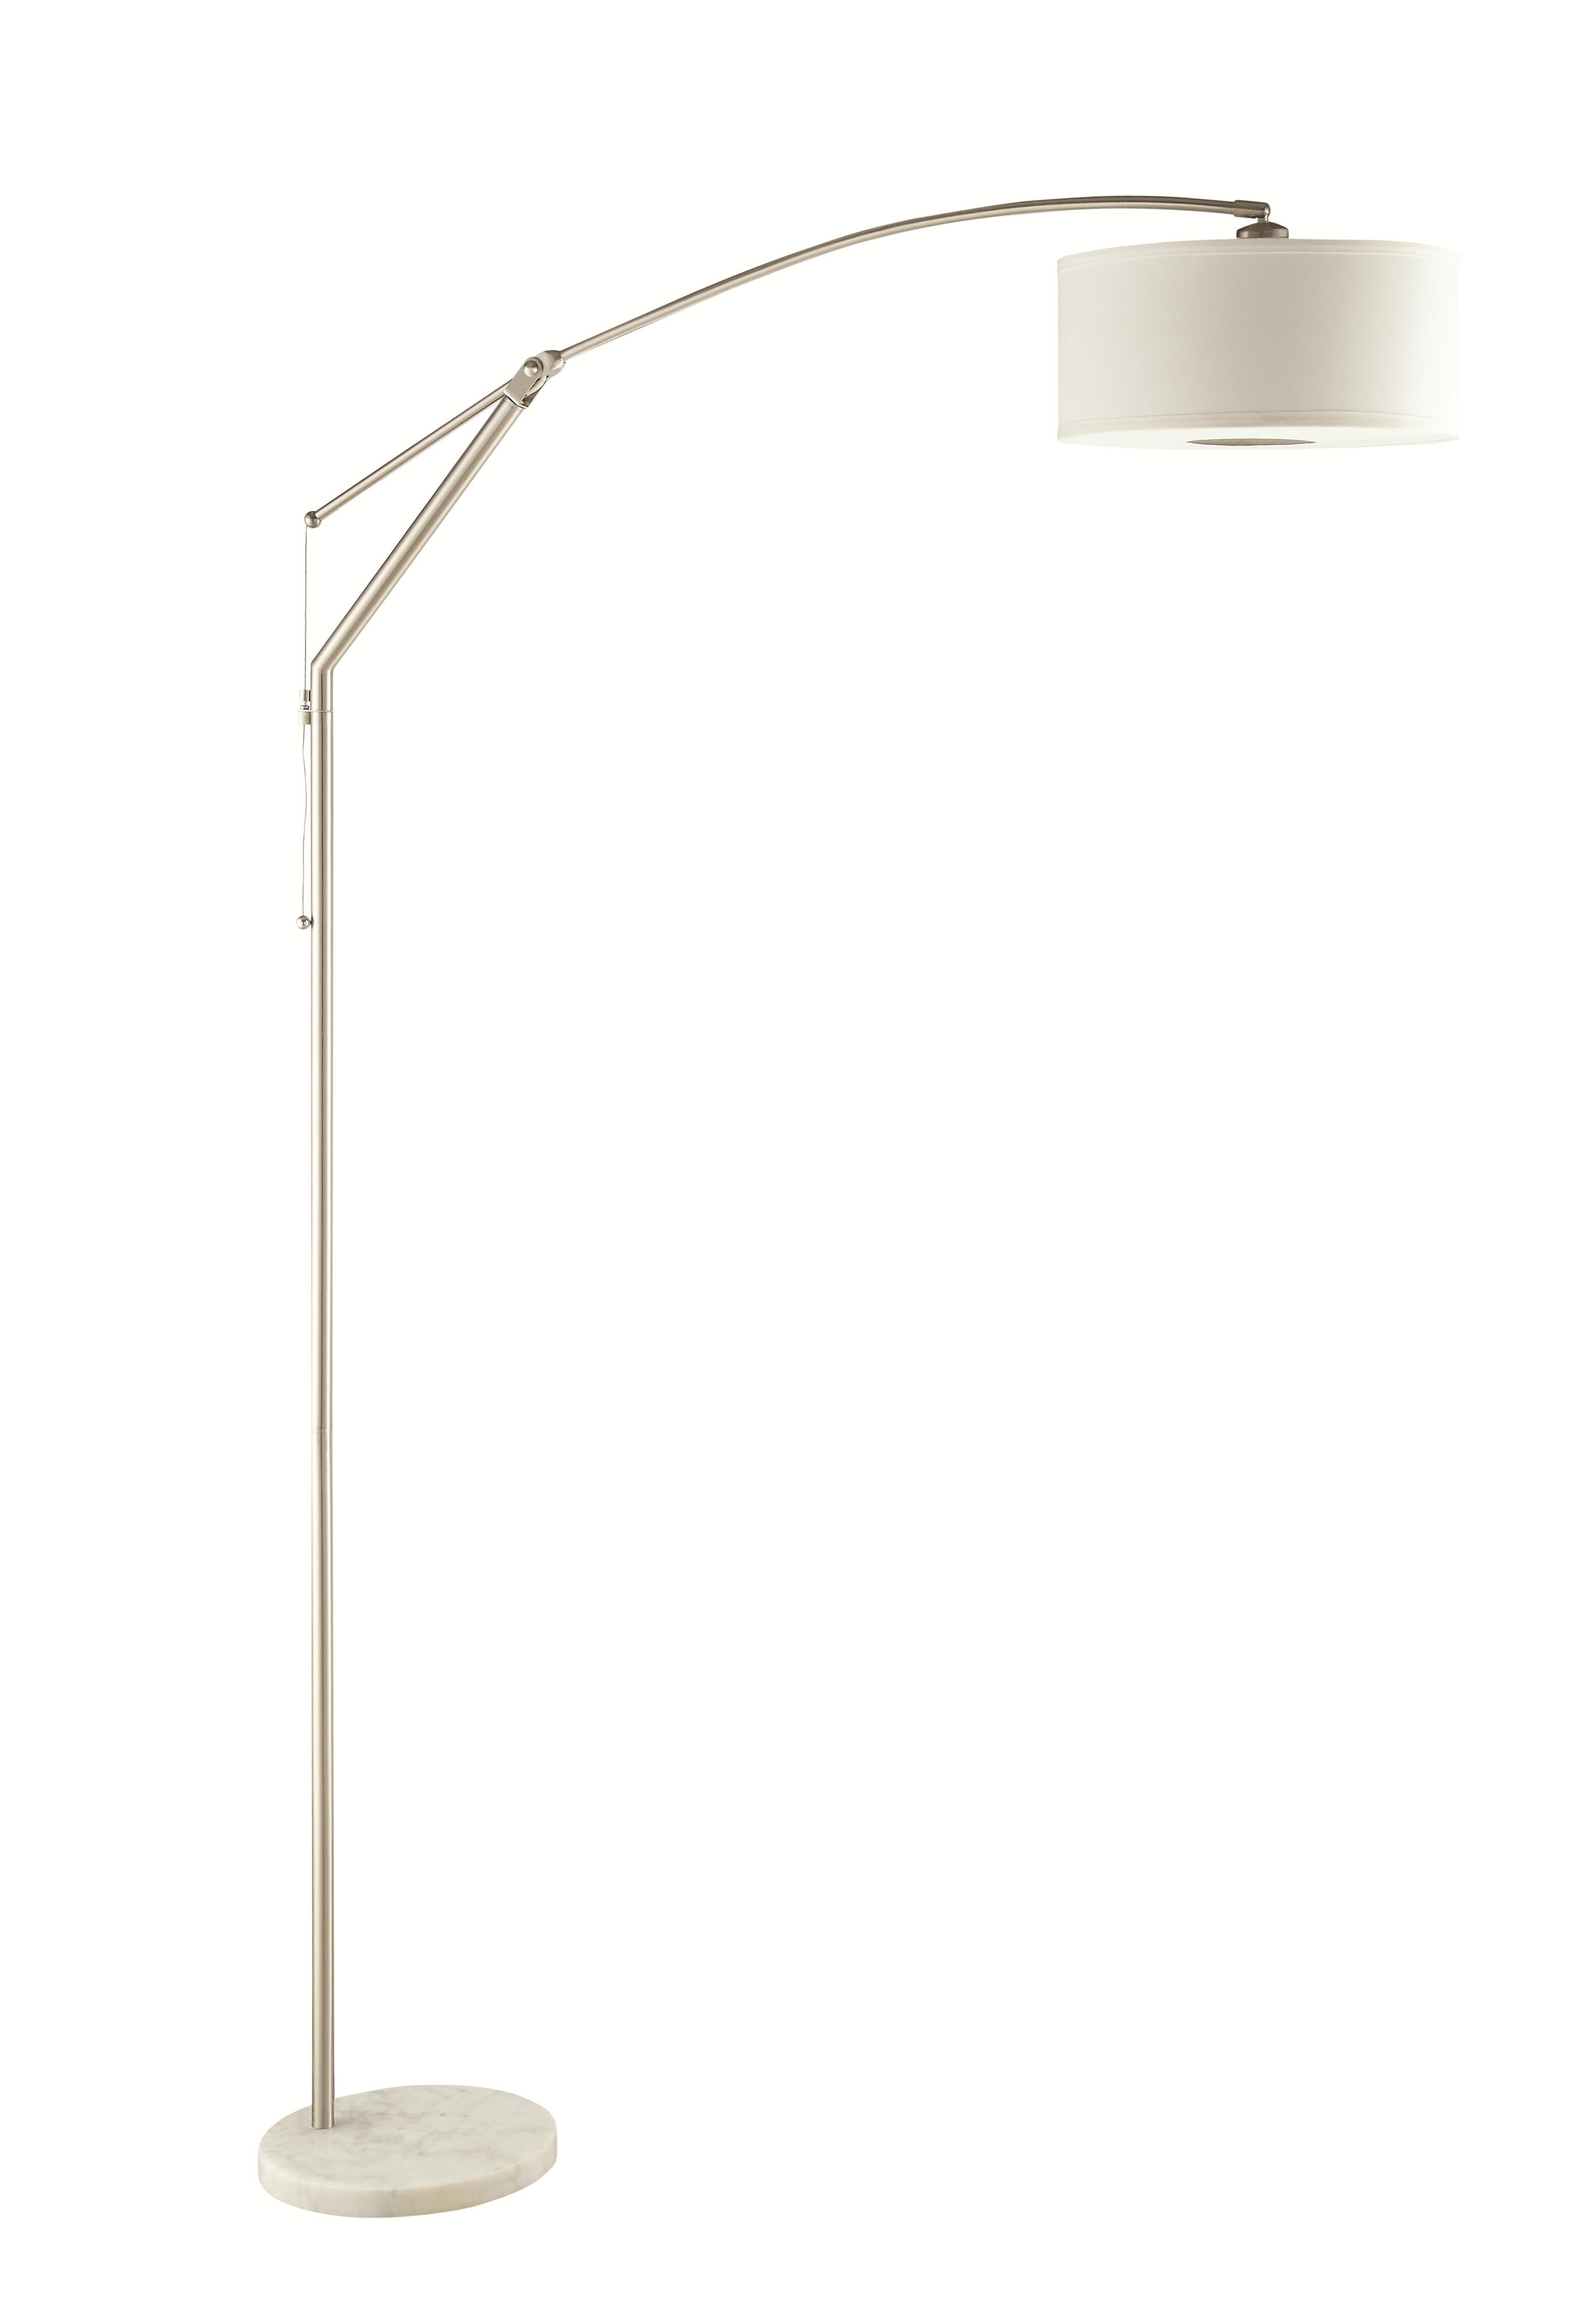 Coaster Floor Lamps Contemporary Over Arching Floor Lamp In Chrome 901490 with regard to sizing 2712 X 4000